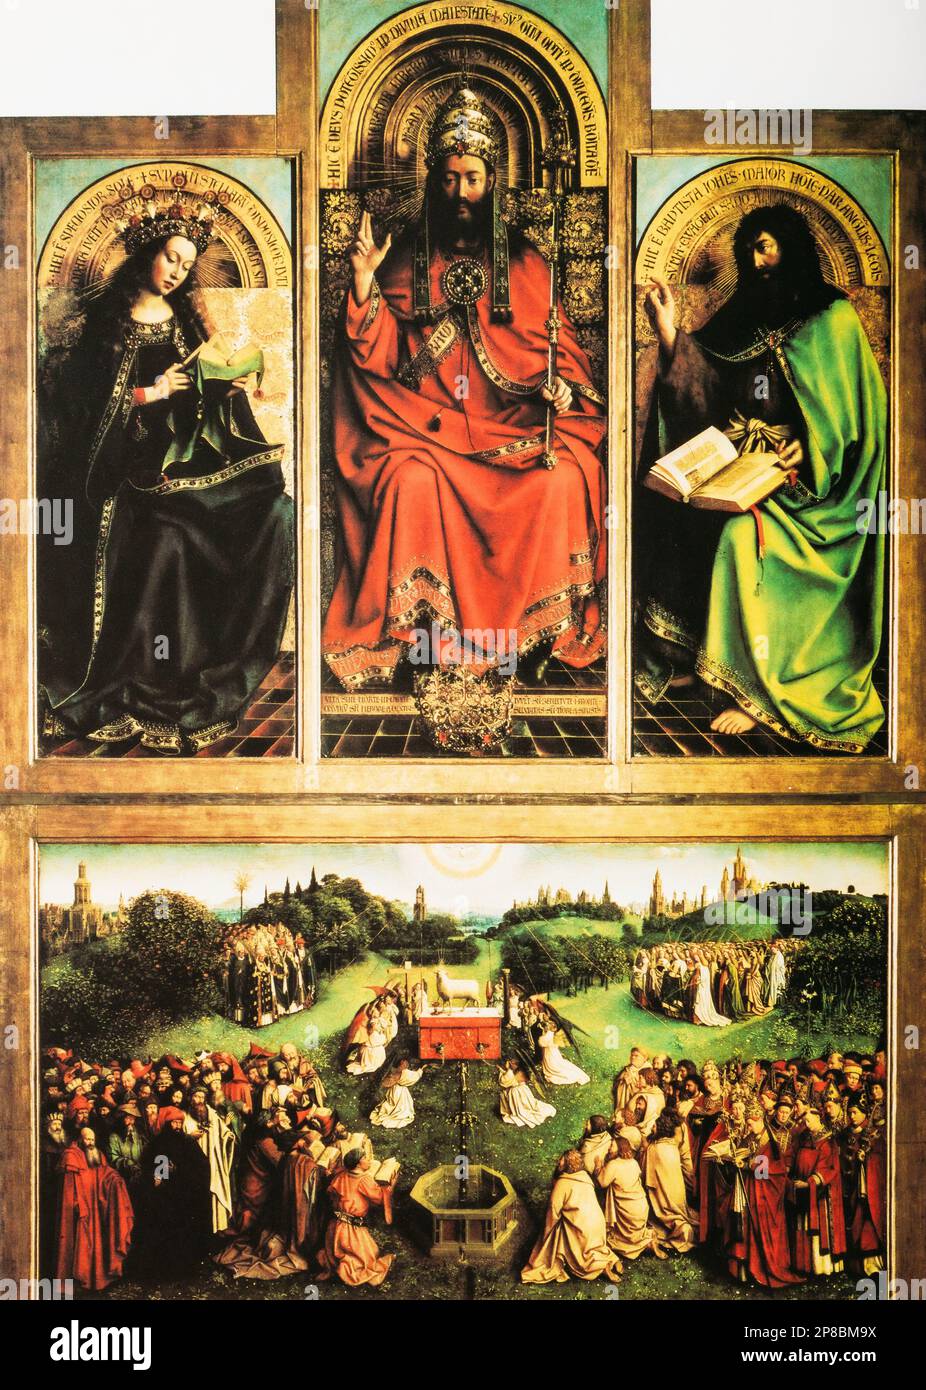 Jan Van Eyck, The Ghent Altarpiece Central Panels Is A Large And ...